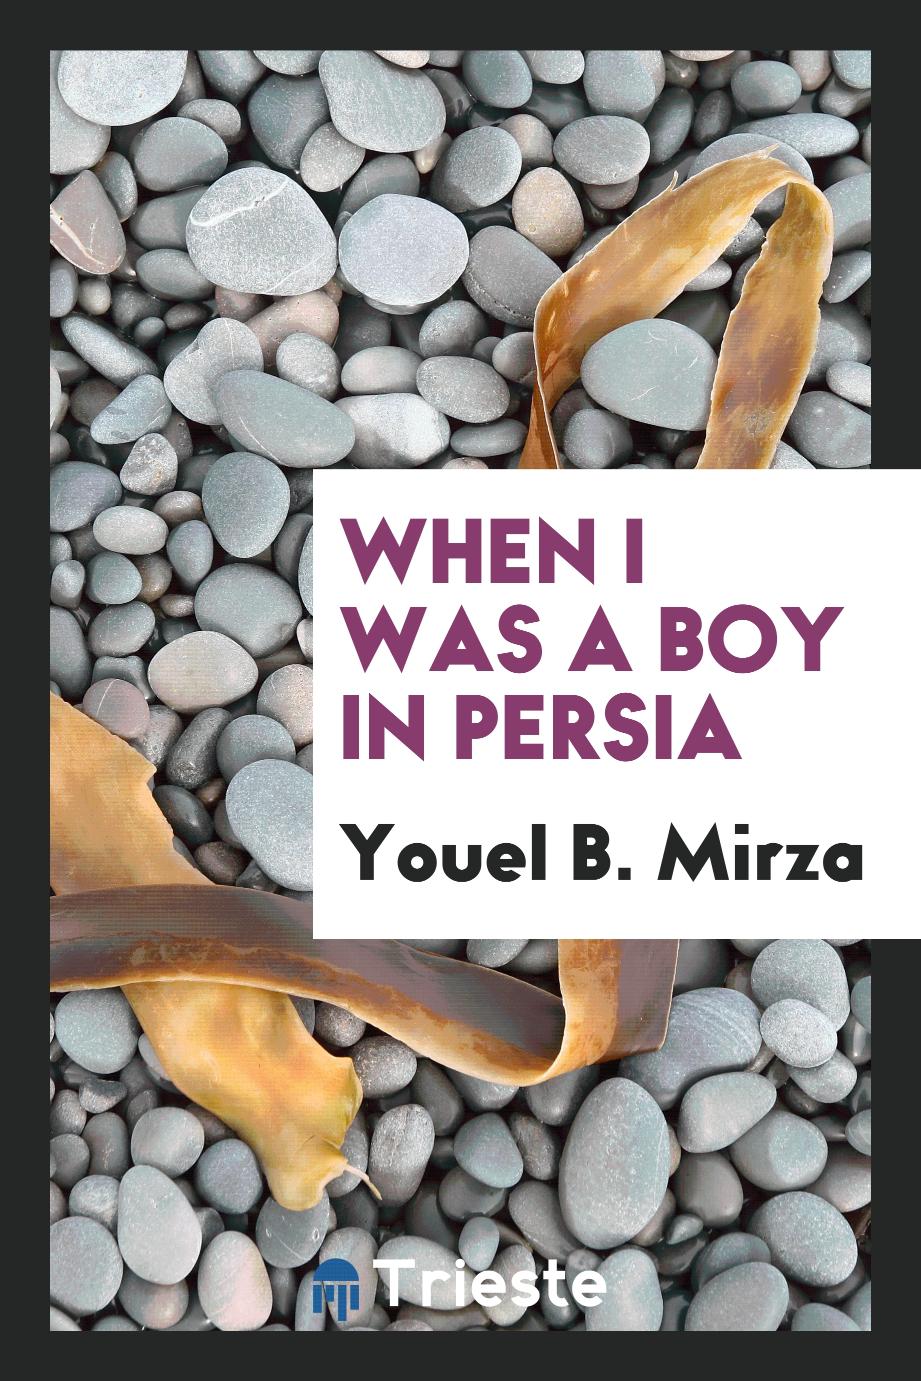 When I was a boy in Persia